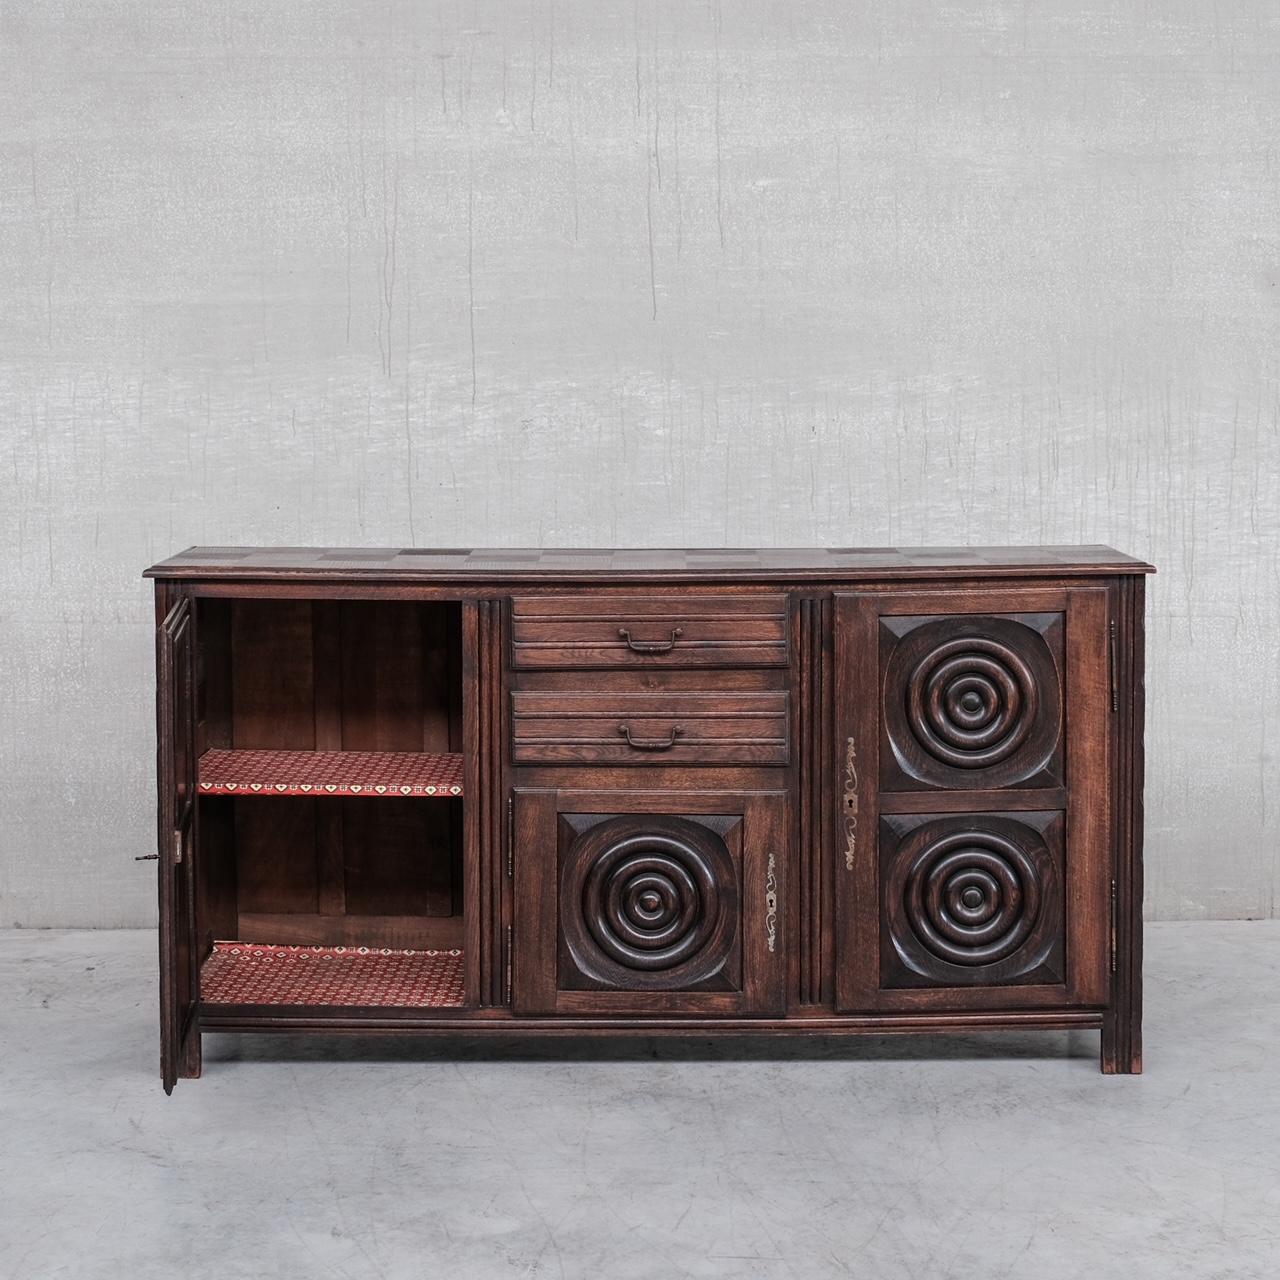 Mid-20th Century Dudouyt Style Art Deco French Sideboard or Credenza